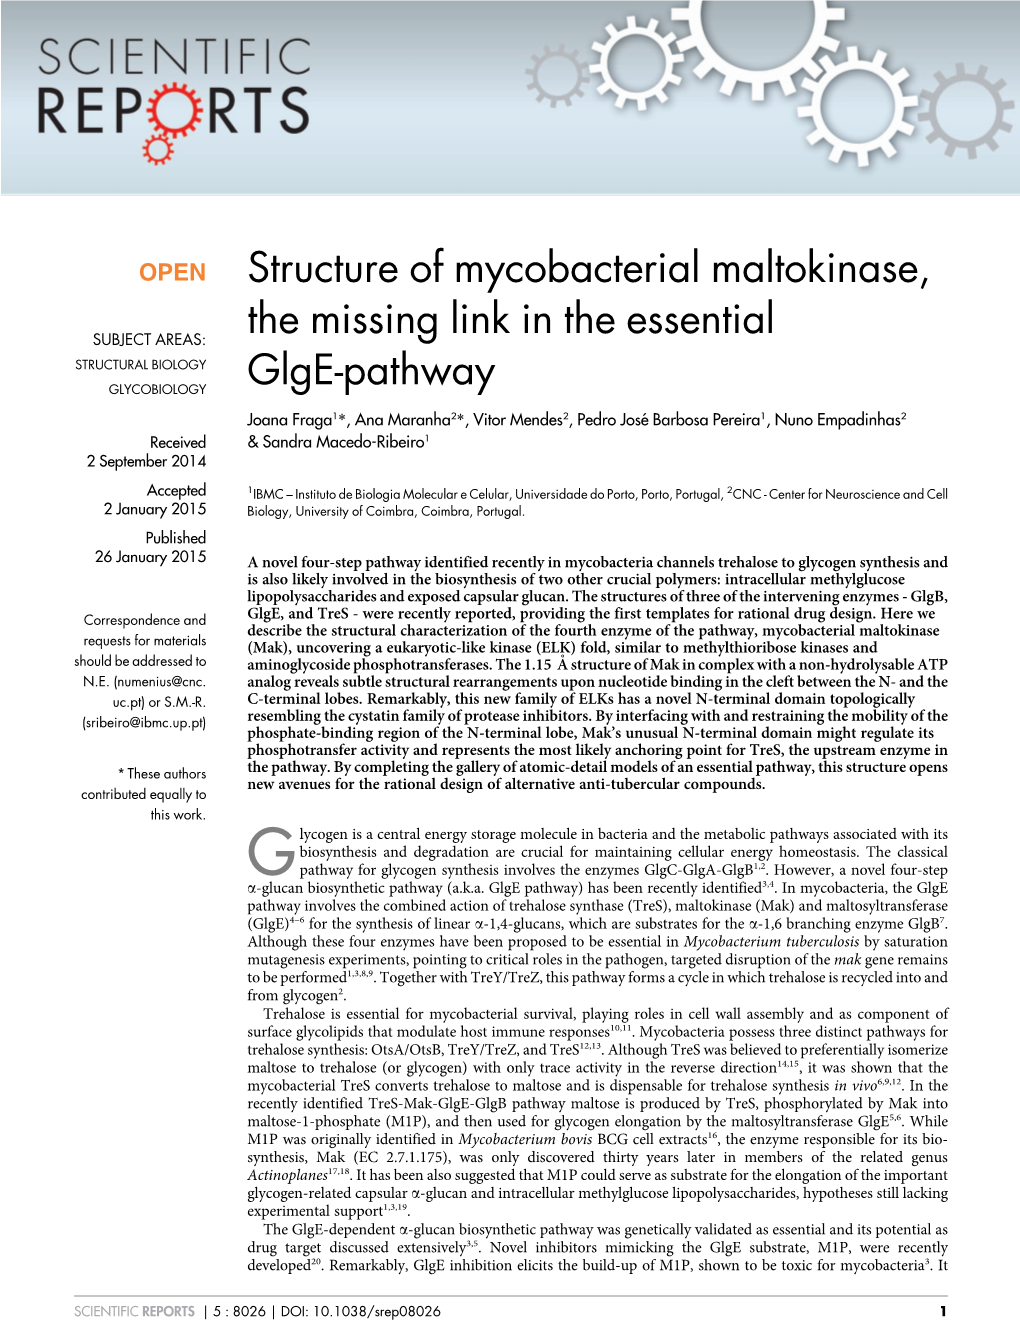 Structure of Mycobacterial Maltokinase, the Missing Link in the Essential Glge-Pathway